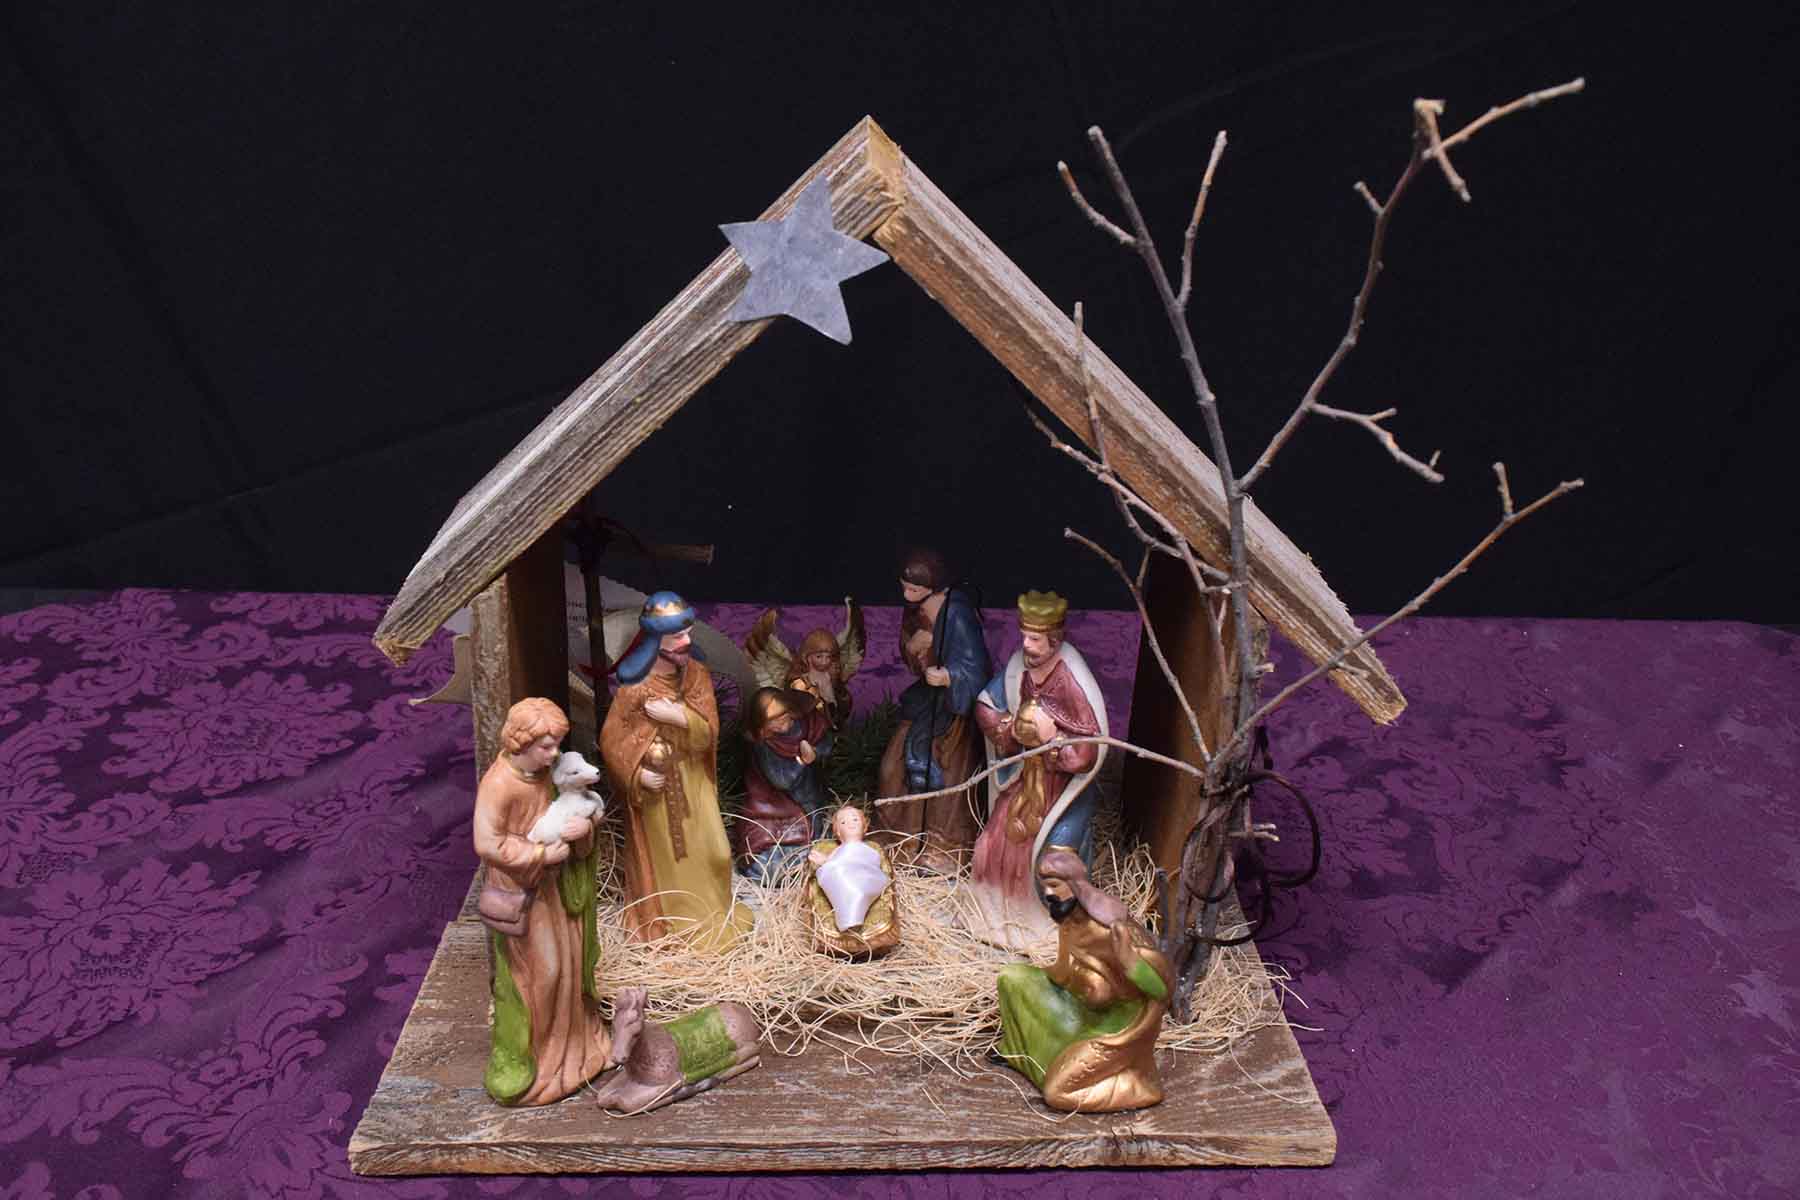 C18_--Nativity_with_handcrafted_creche.jpg